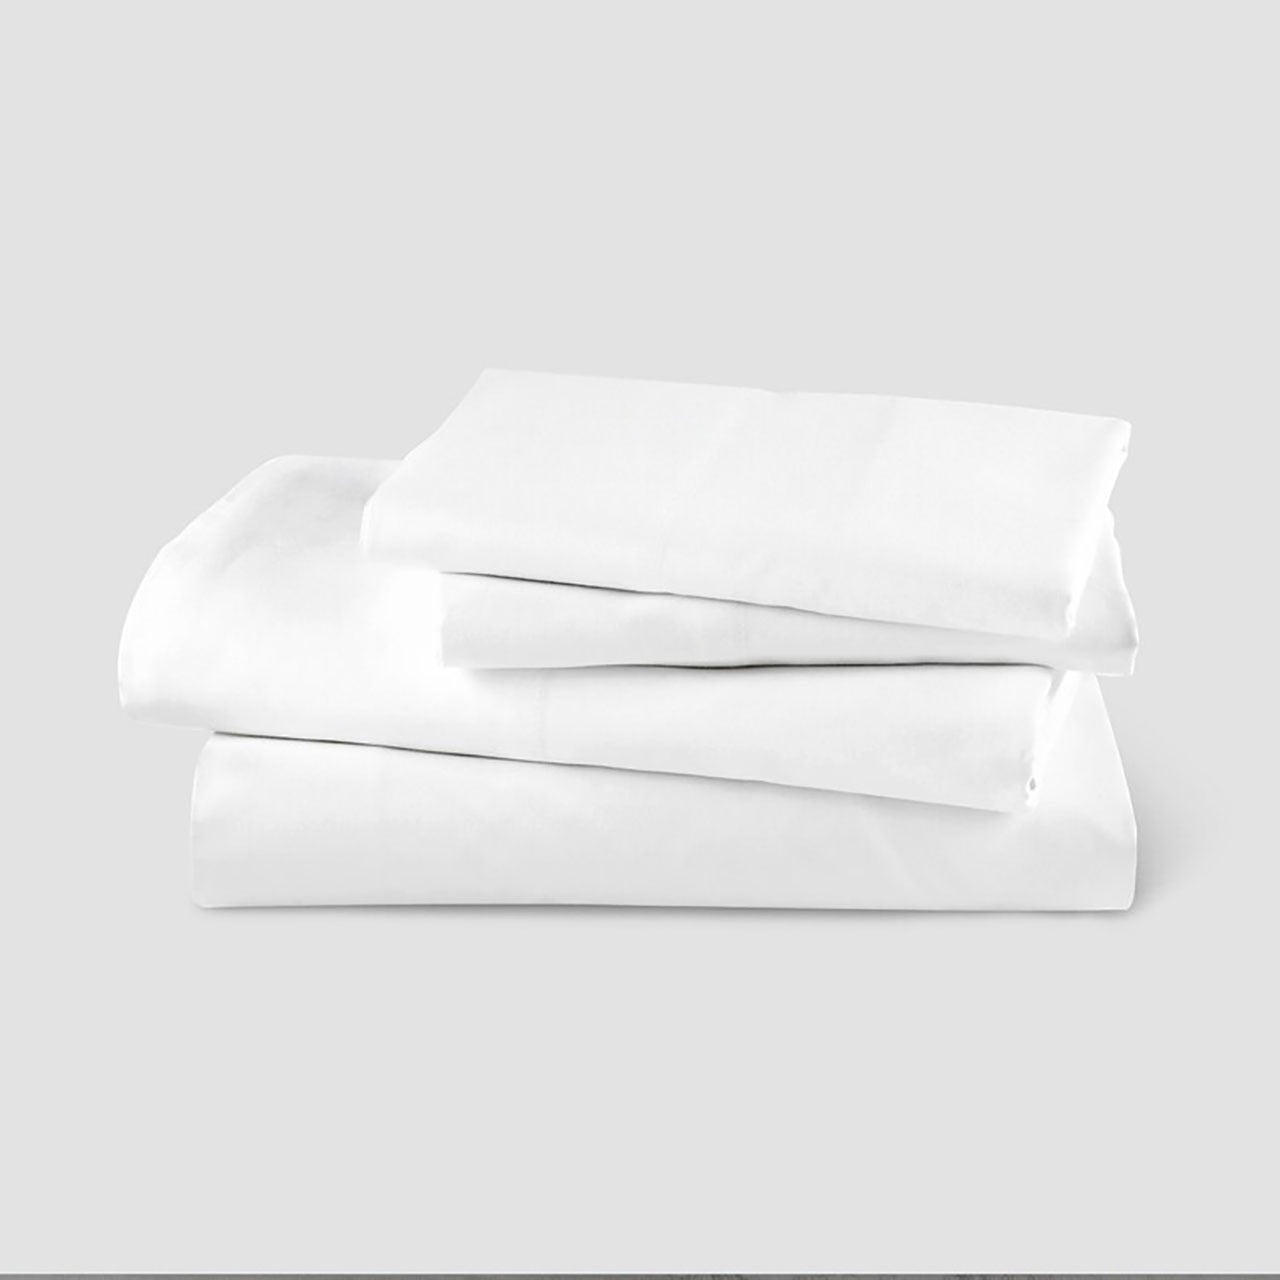 EUQIFAH Cotton Sateen Bed Sheet Set -Soft Silky Shiny - Luxurious Comfort Bedding Fade & Shrink Resistant -T600-4 Pieces (Queen Size) White)